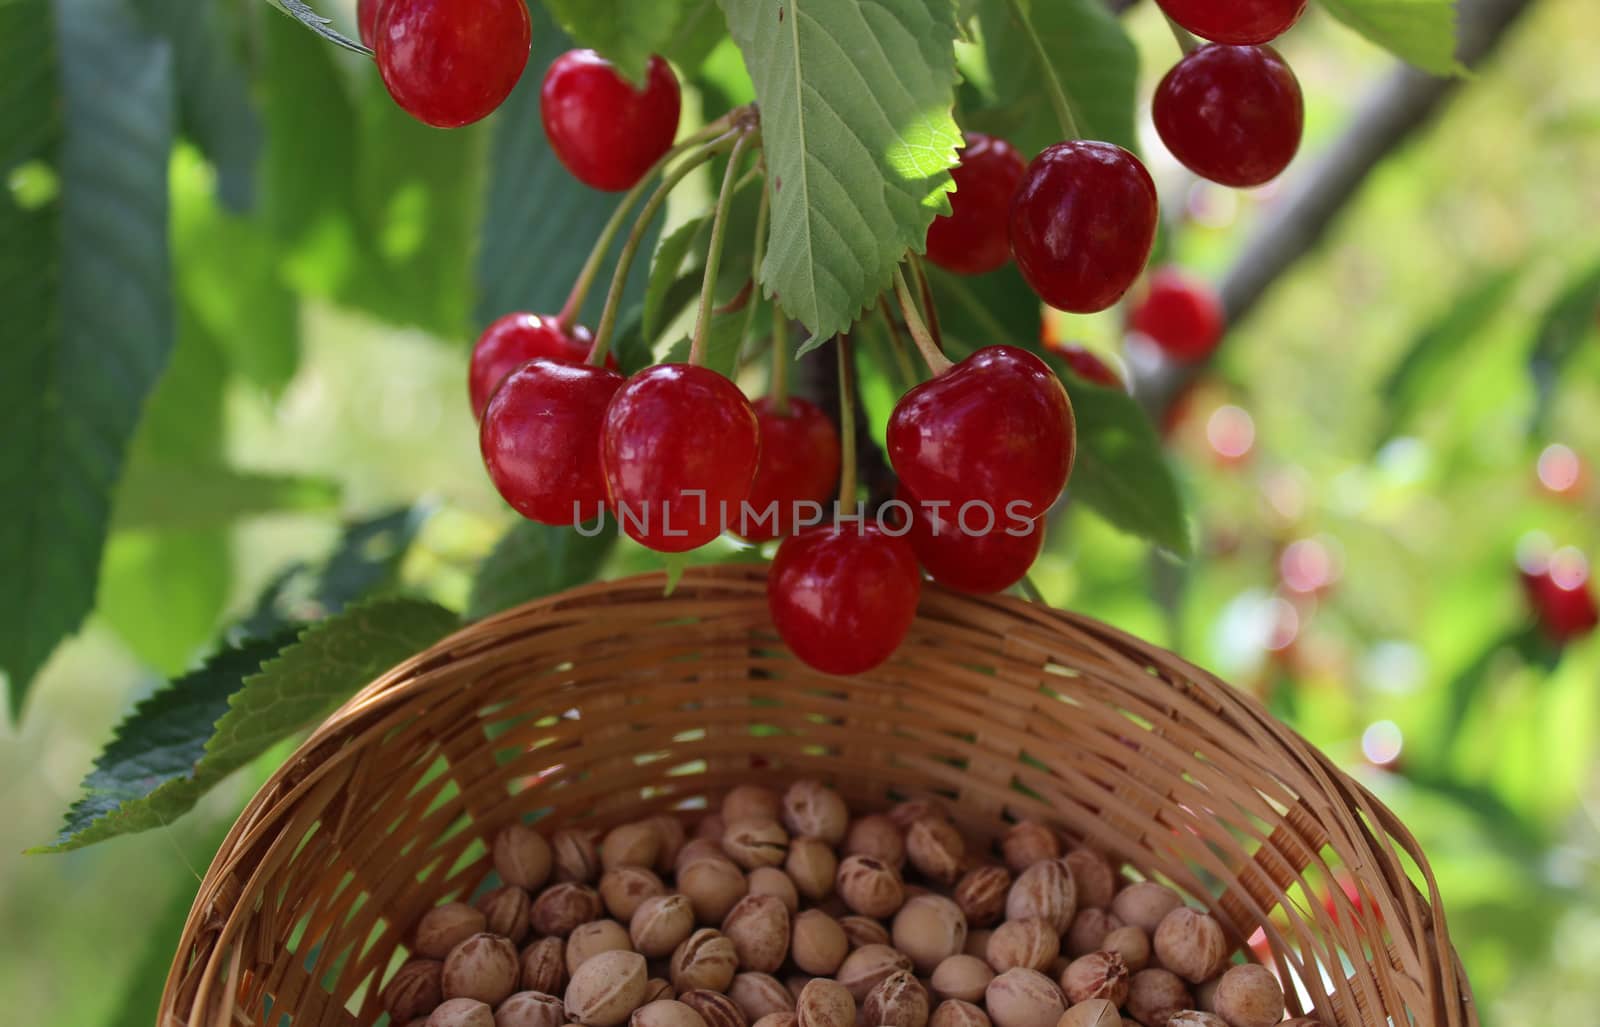 The picture shows many cherry stones and cherries